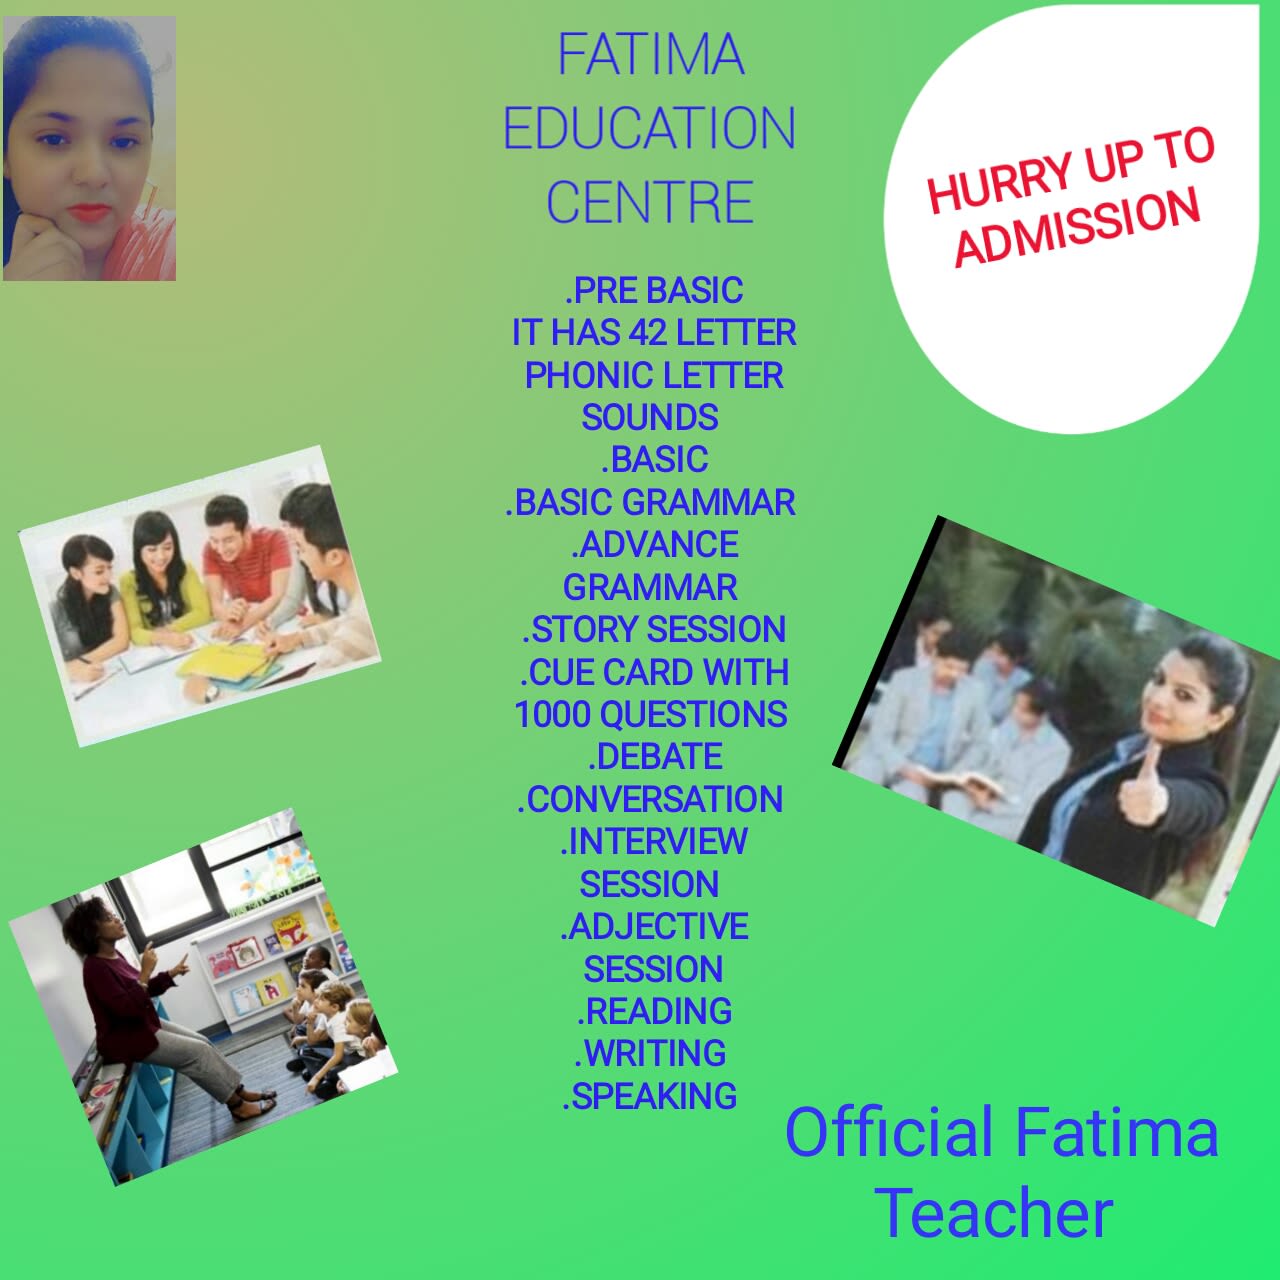 Fatima Education Centre Education Services English Speaking, 50% OFF